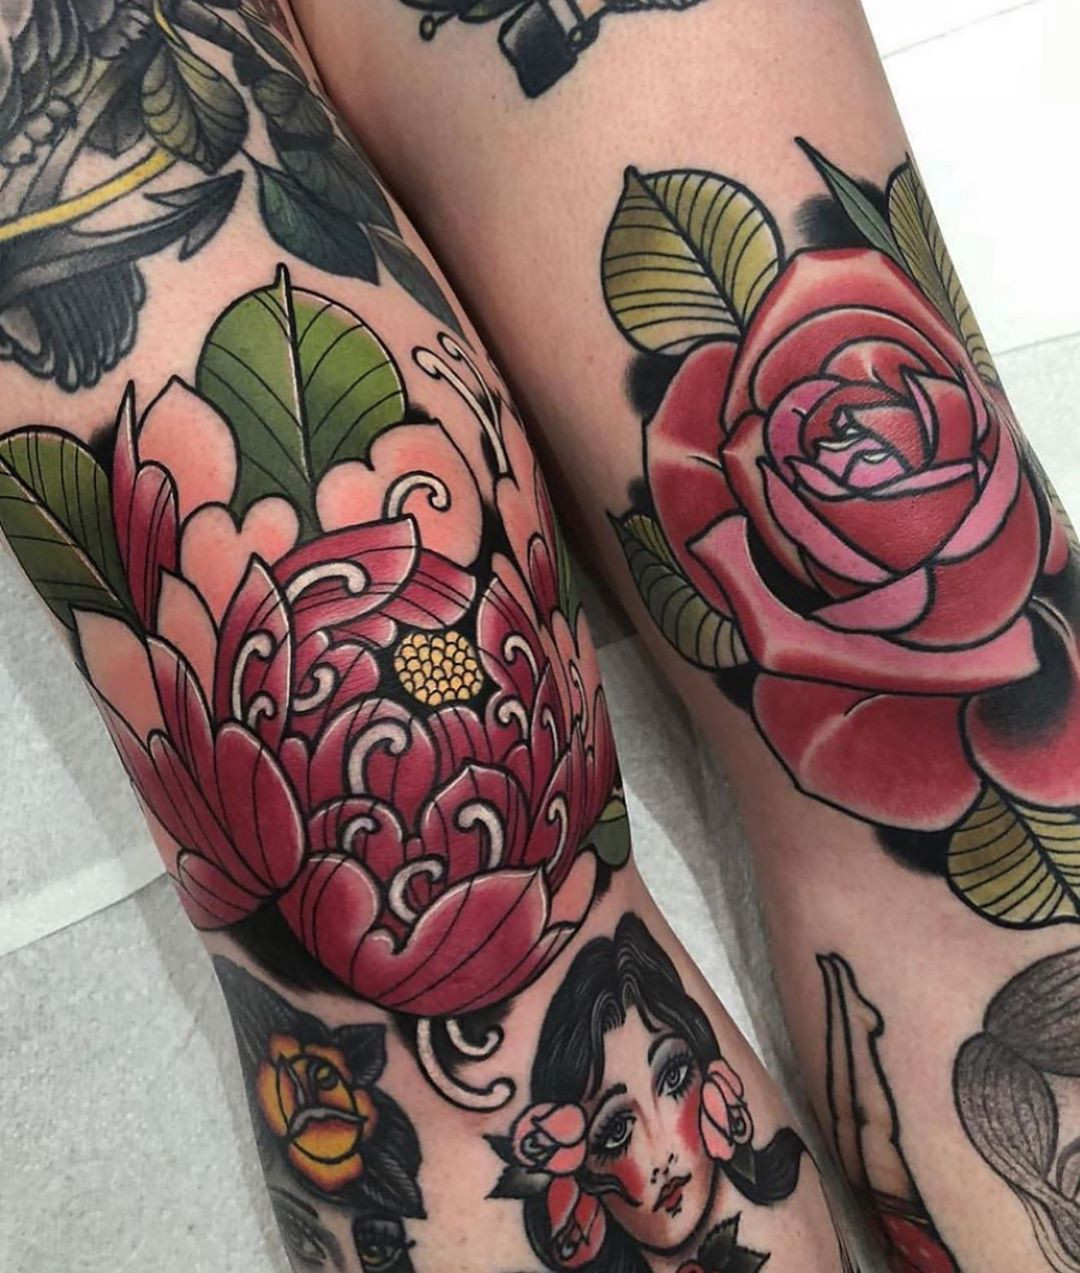 55 Knee Tattoos That are Totally Worth the Pain,knee tattoos for females,knee tattoos male,knee tattoos for ladies,knee tattoos female